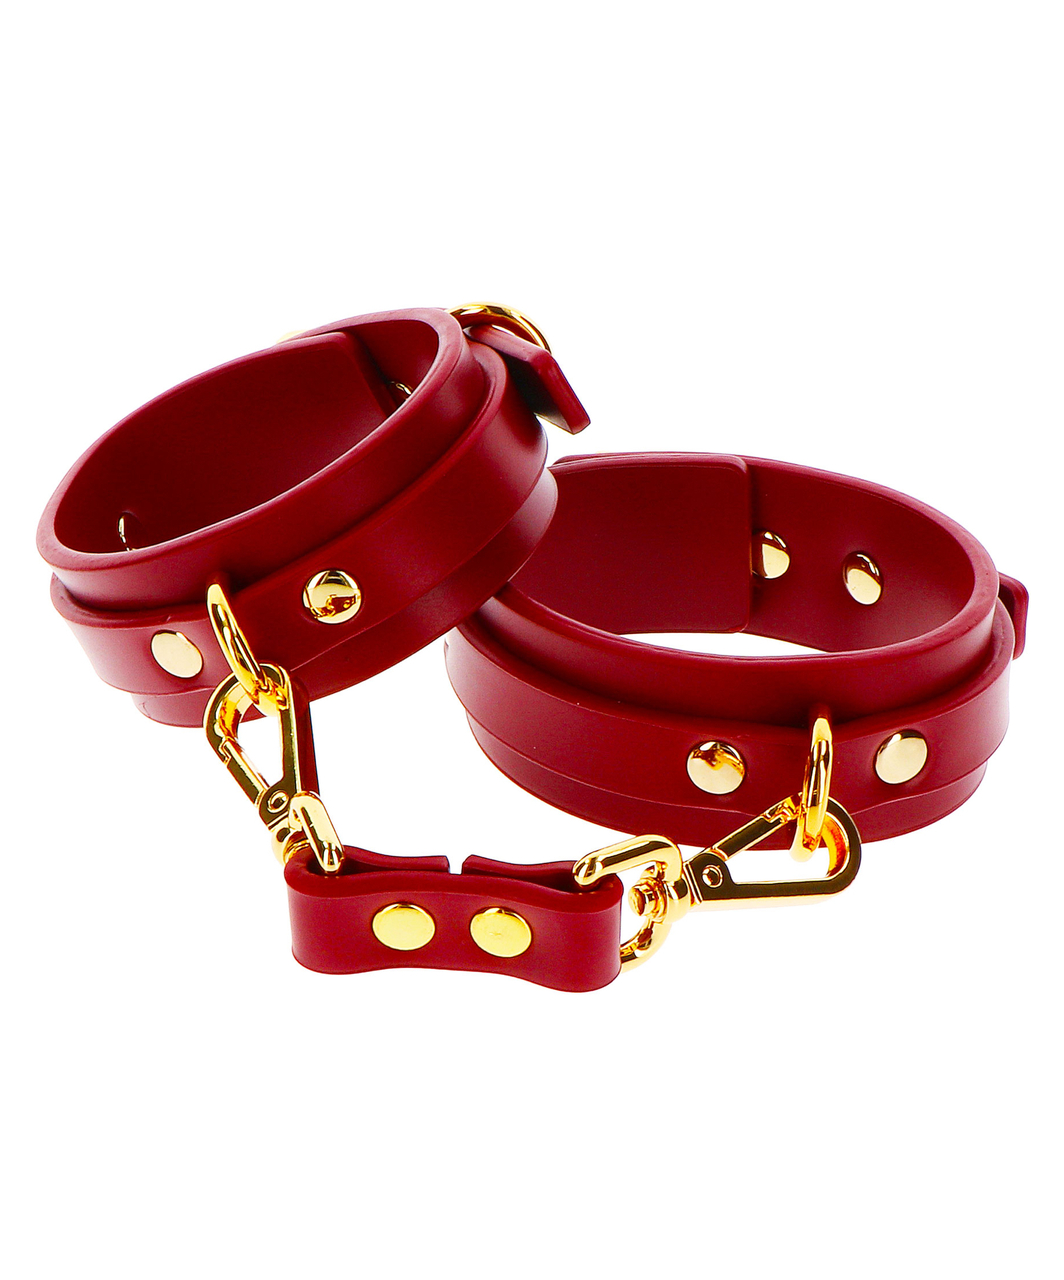 Taboom burgundy faux leather ankle cuffs